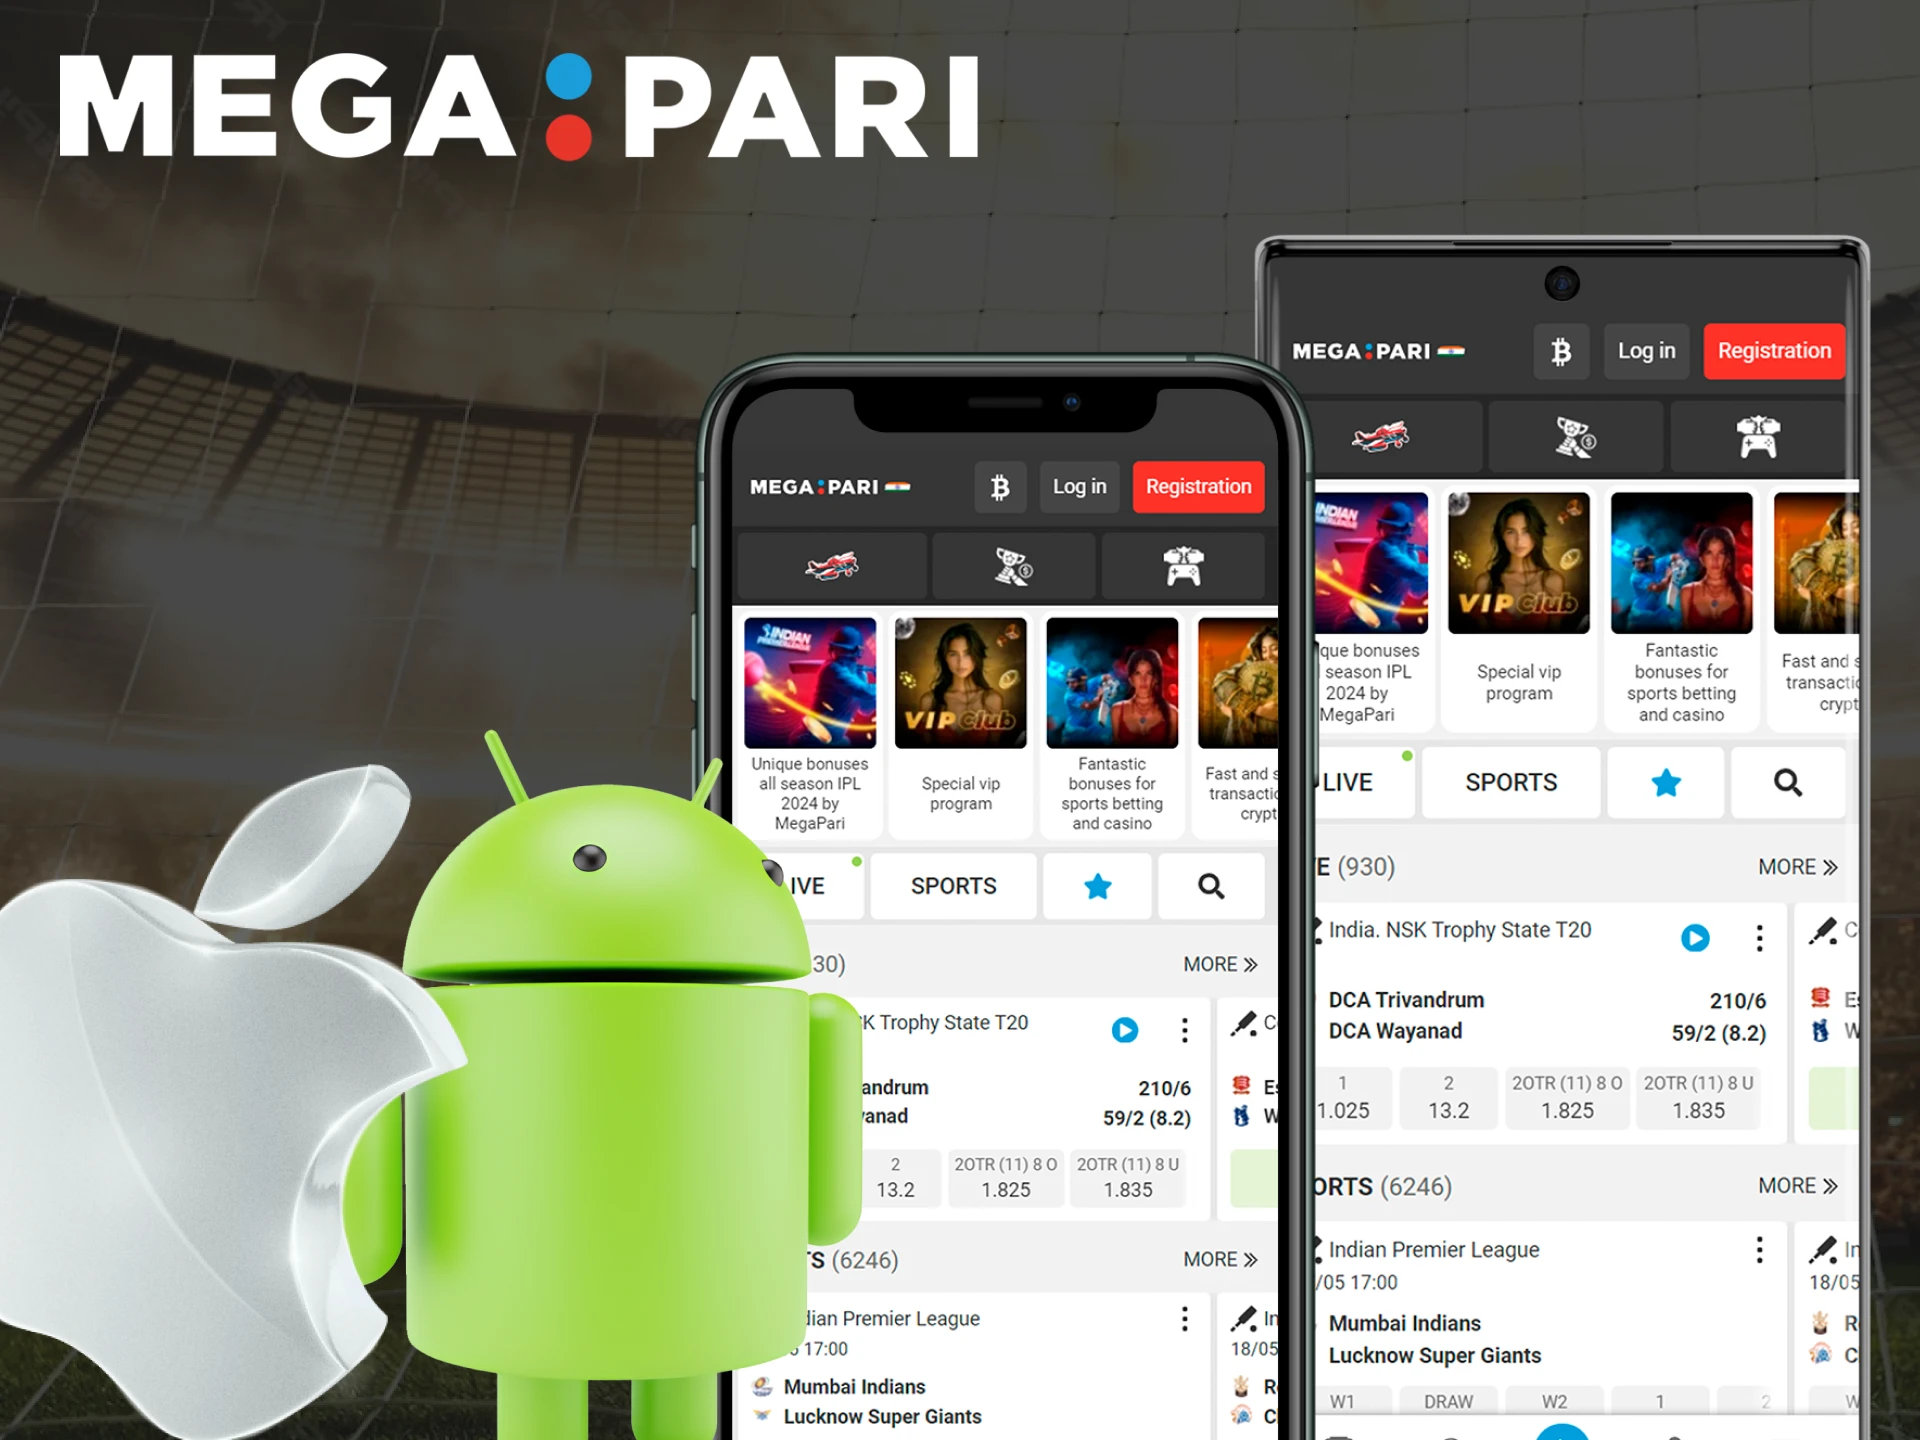 Use the mobile app developed by Megapari bookmaker for android and ios devices, which allows you to optimise your sports and casino betting experience.